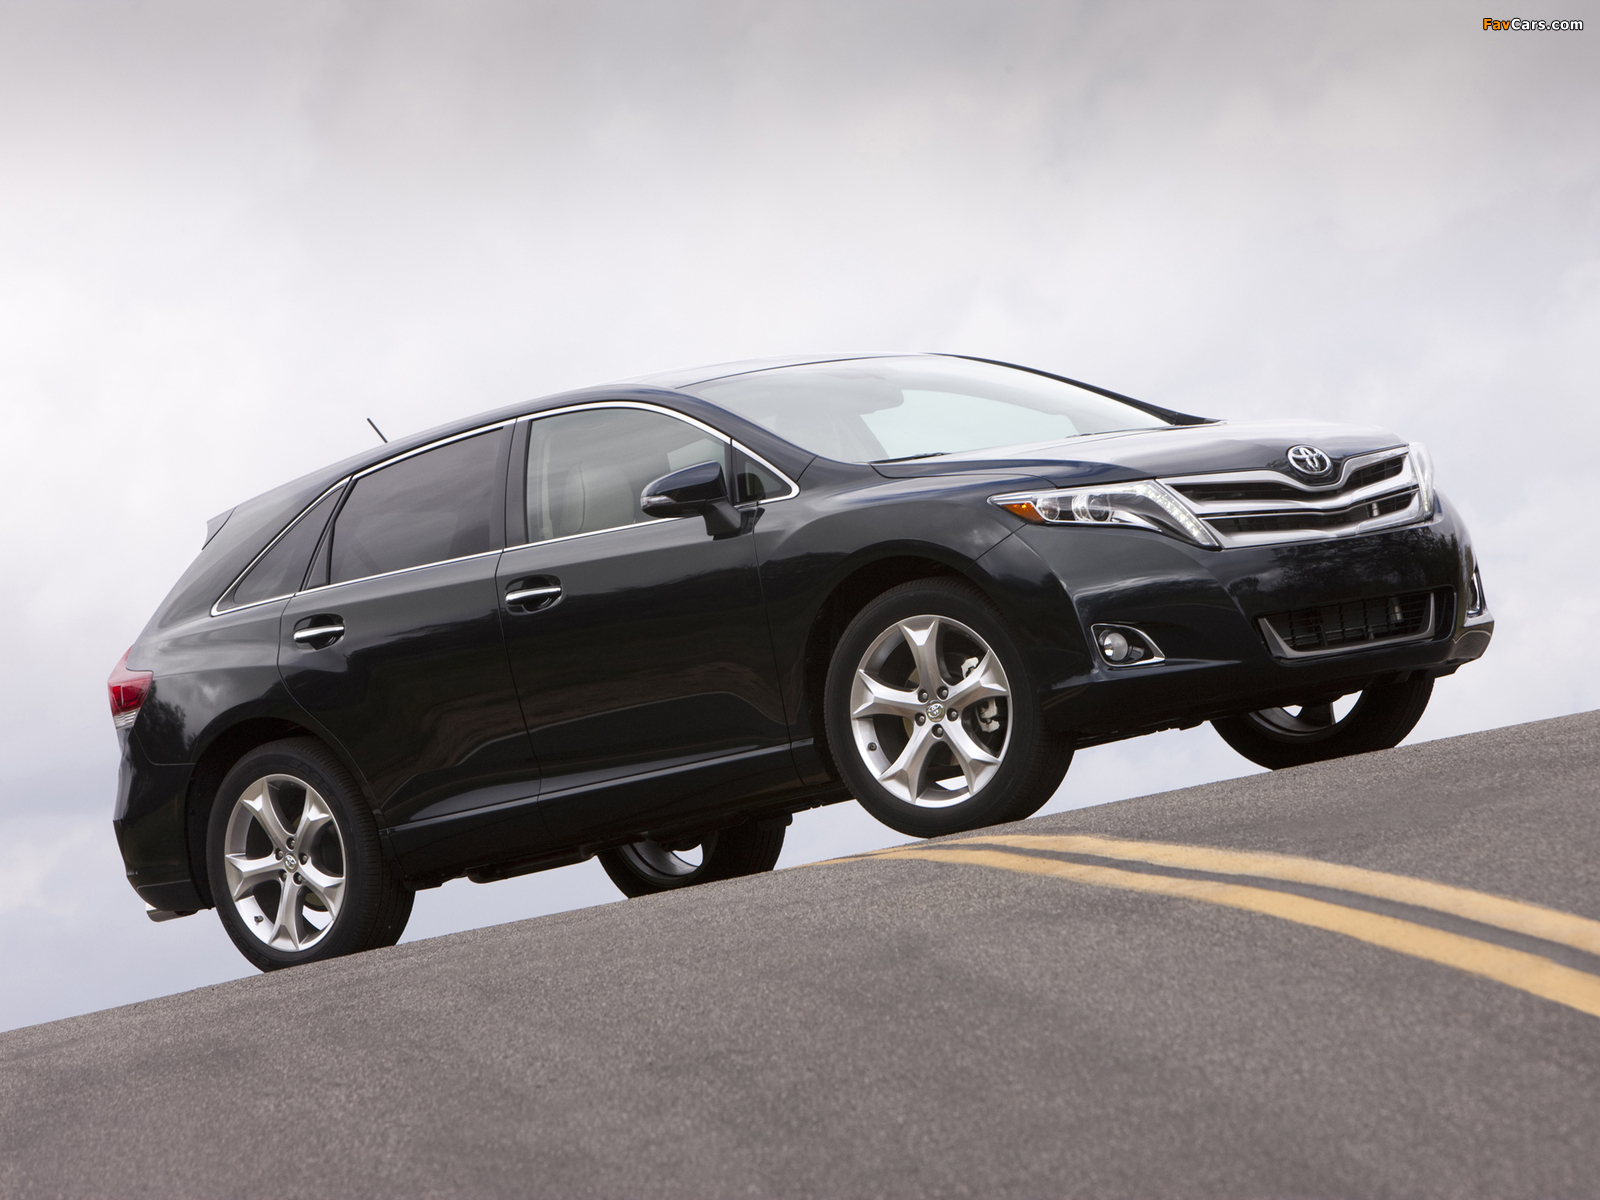 Toyota Venza 2012 images (1600 x 1200)